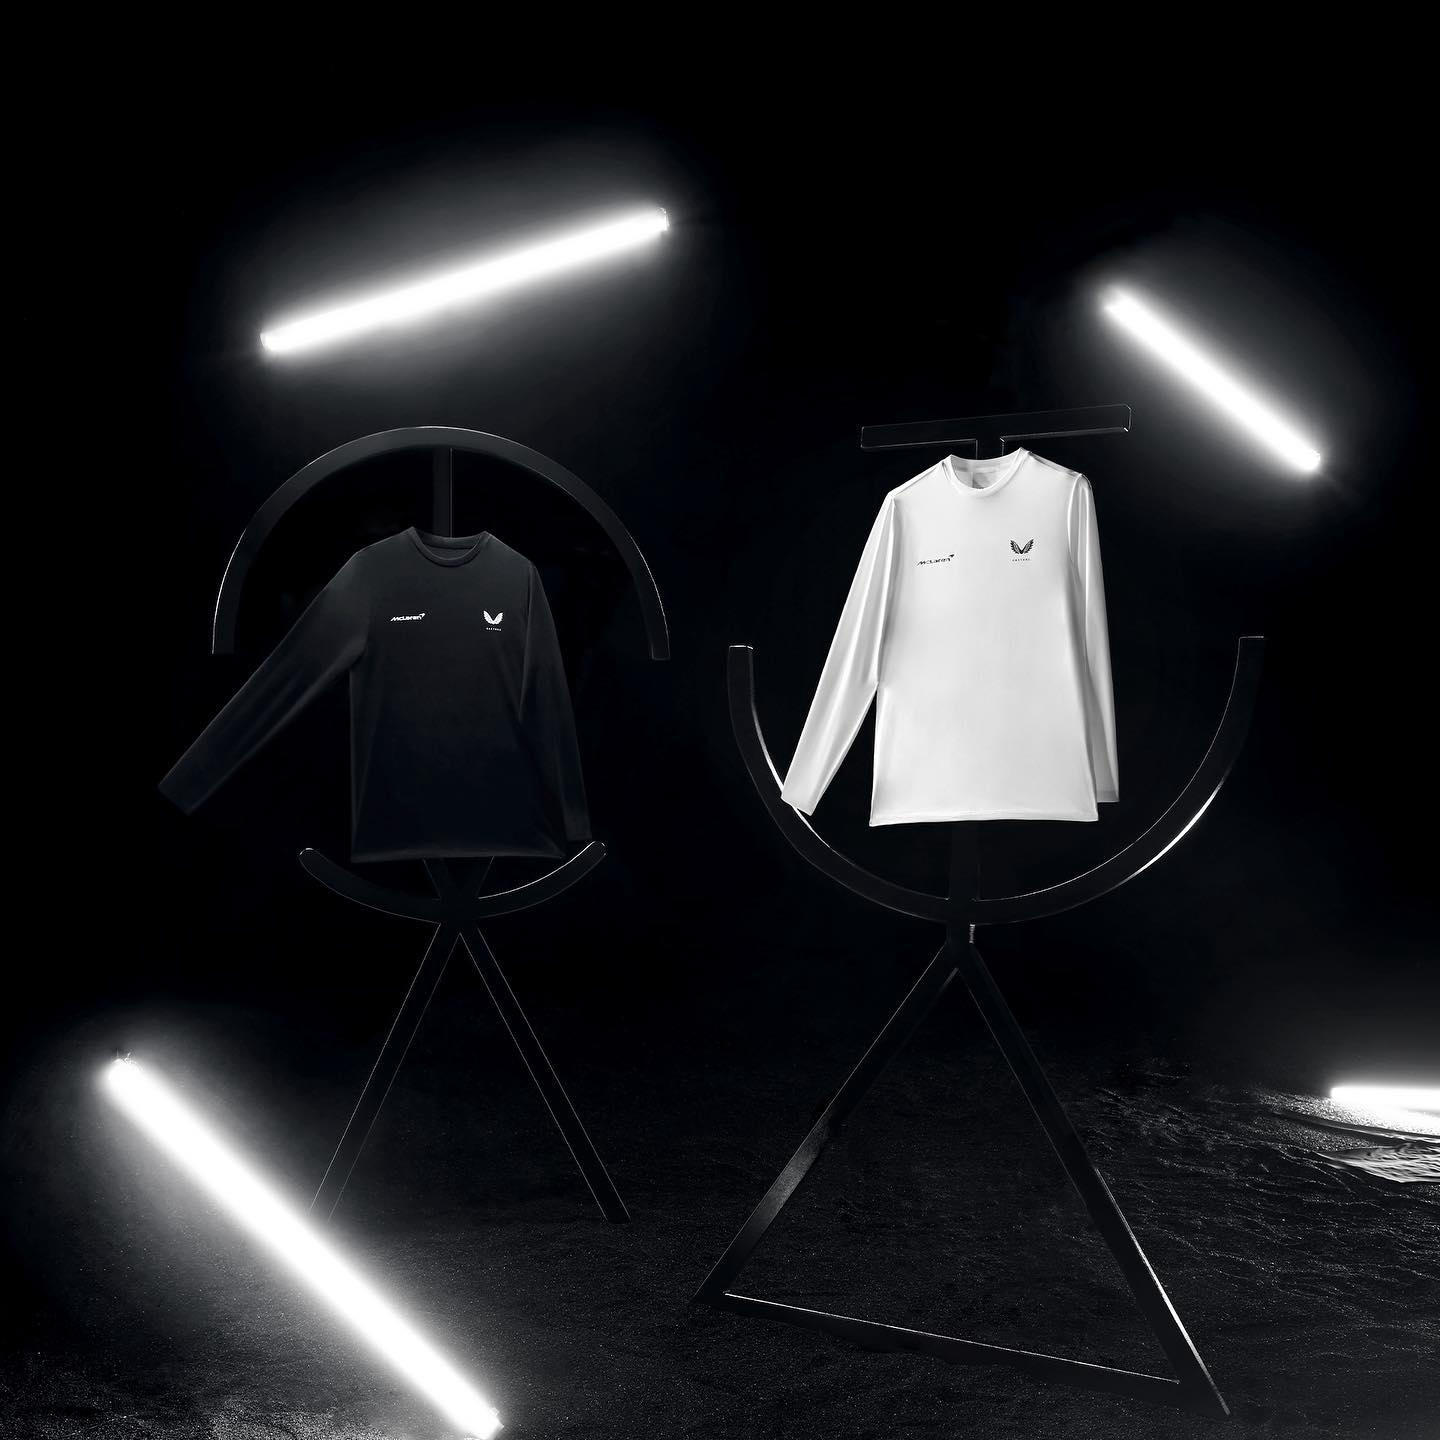 image  1 McLaren Automotive - The new Black Edition is a contemporary collection where relentless innovators